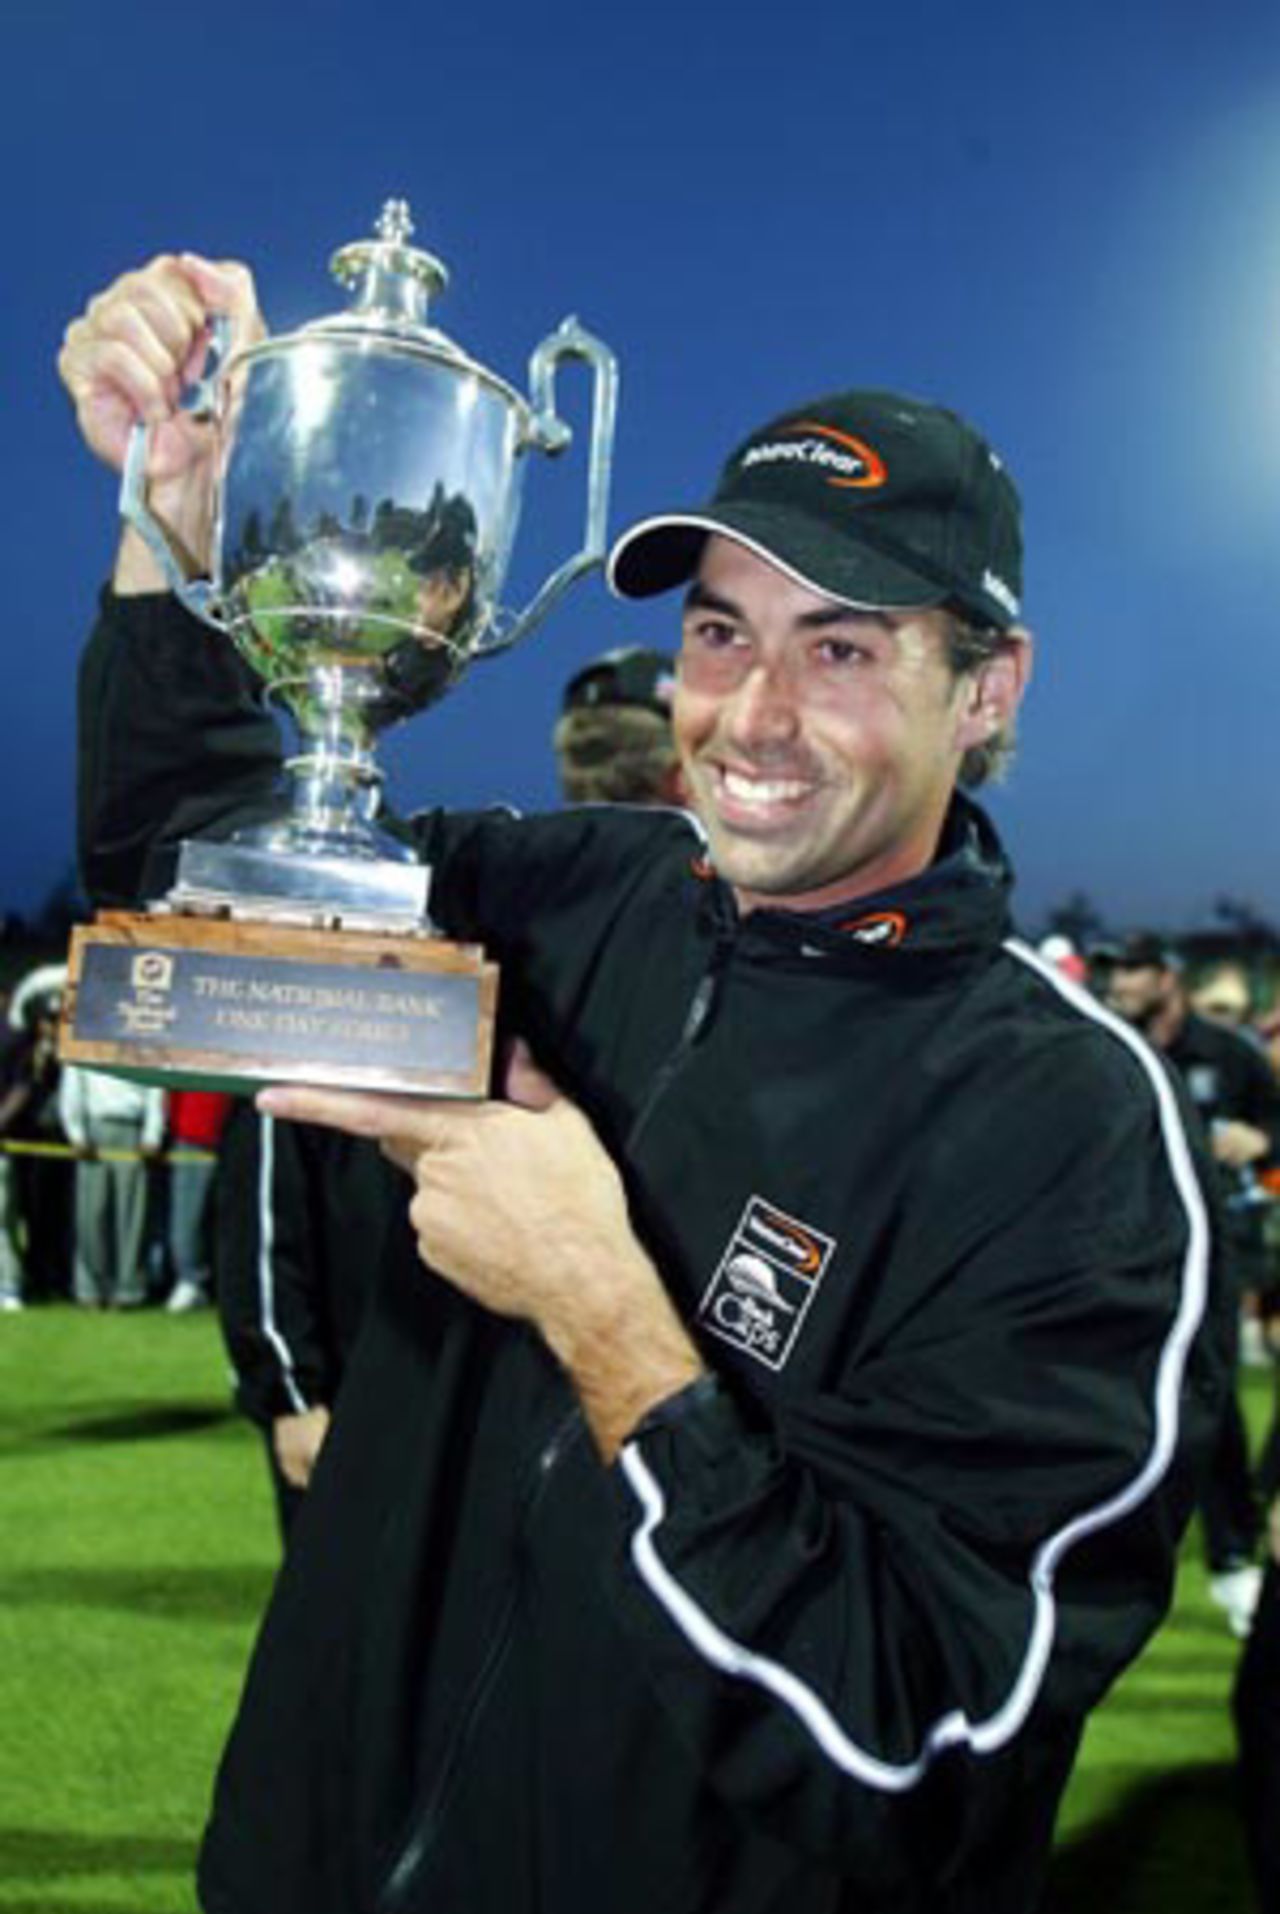 New Zealand captain Stephen Fleming holds up the National Bank One-Day International Series trophy. New Zealand won the seven-match series 5-2. 7th ODI: New Zealand v India at Westpac Park, Hamilton, 14 January 2003.